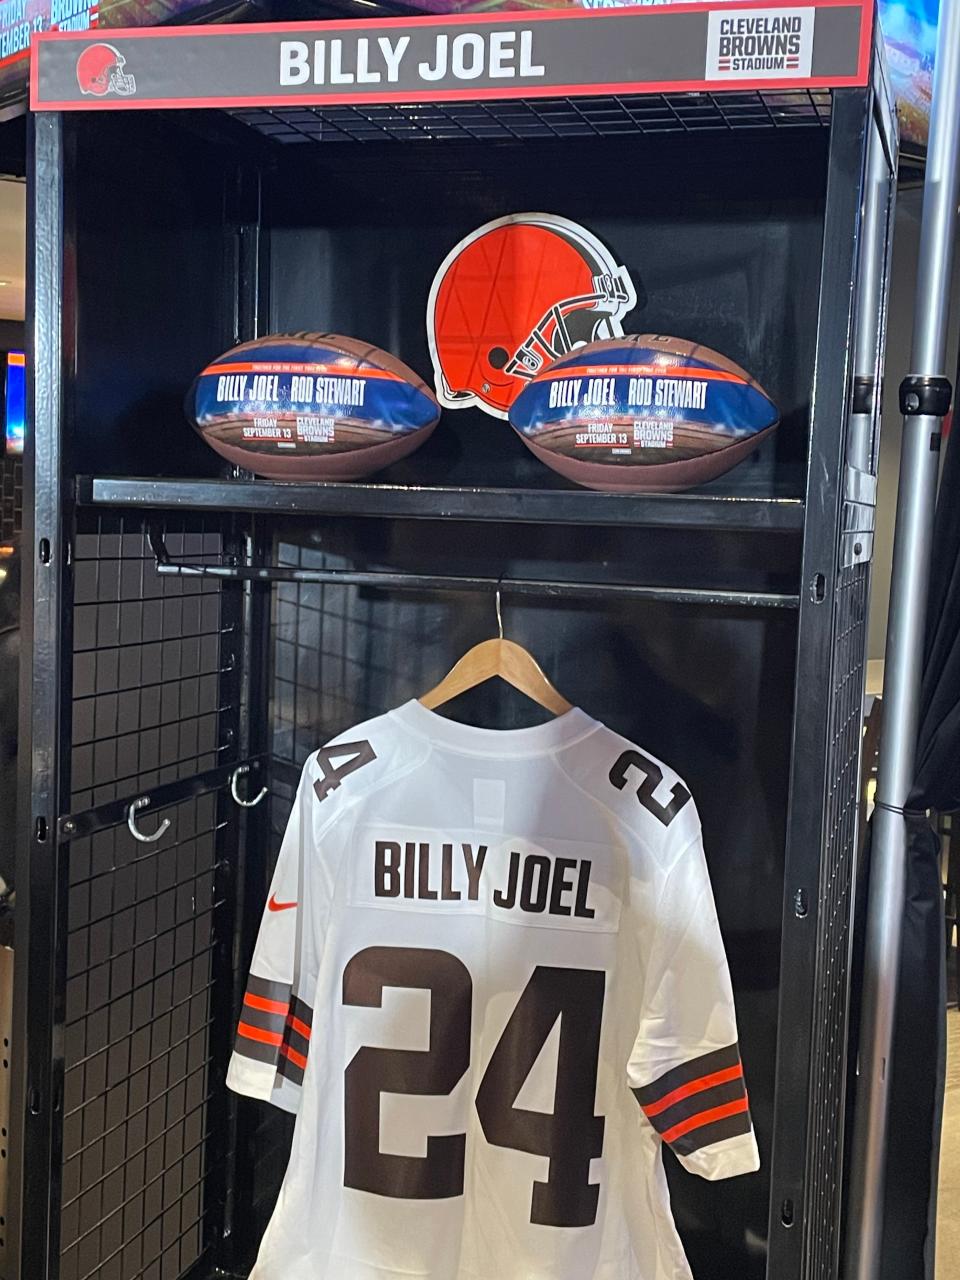 Billy Joel will perform at Cleveland Browns Stadium in September.